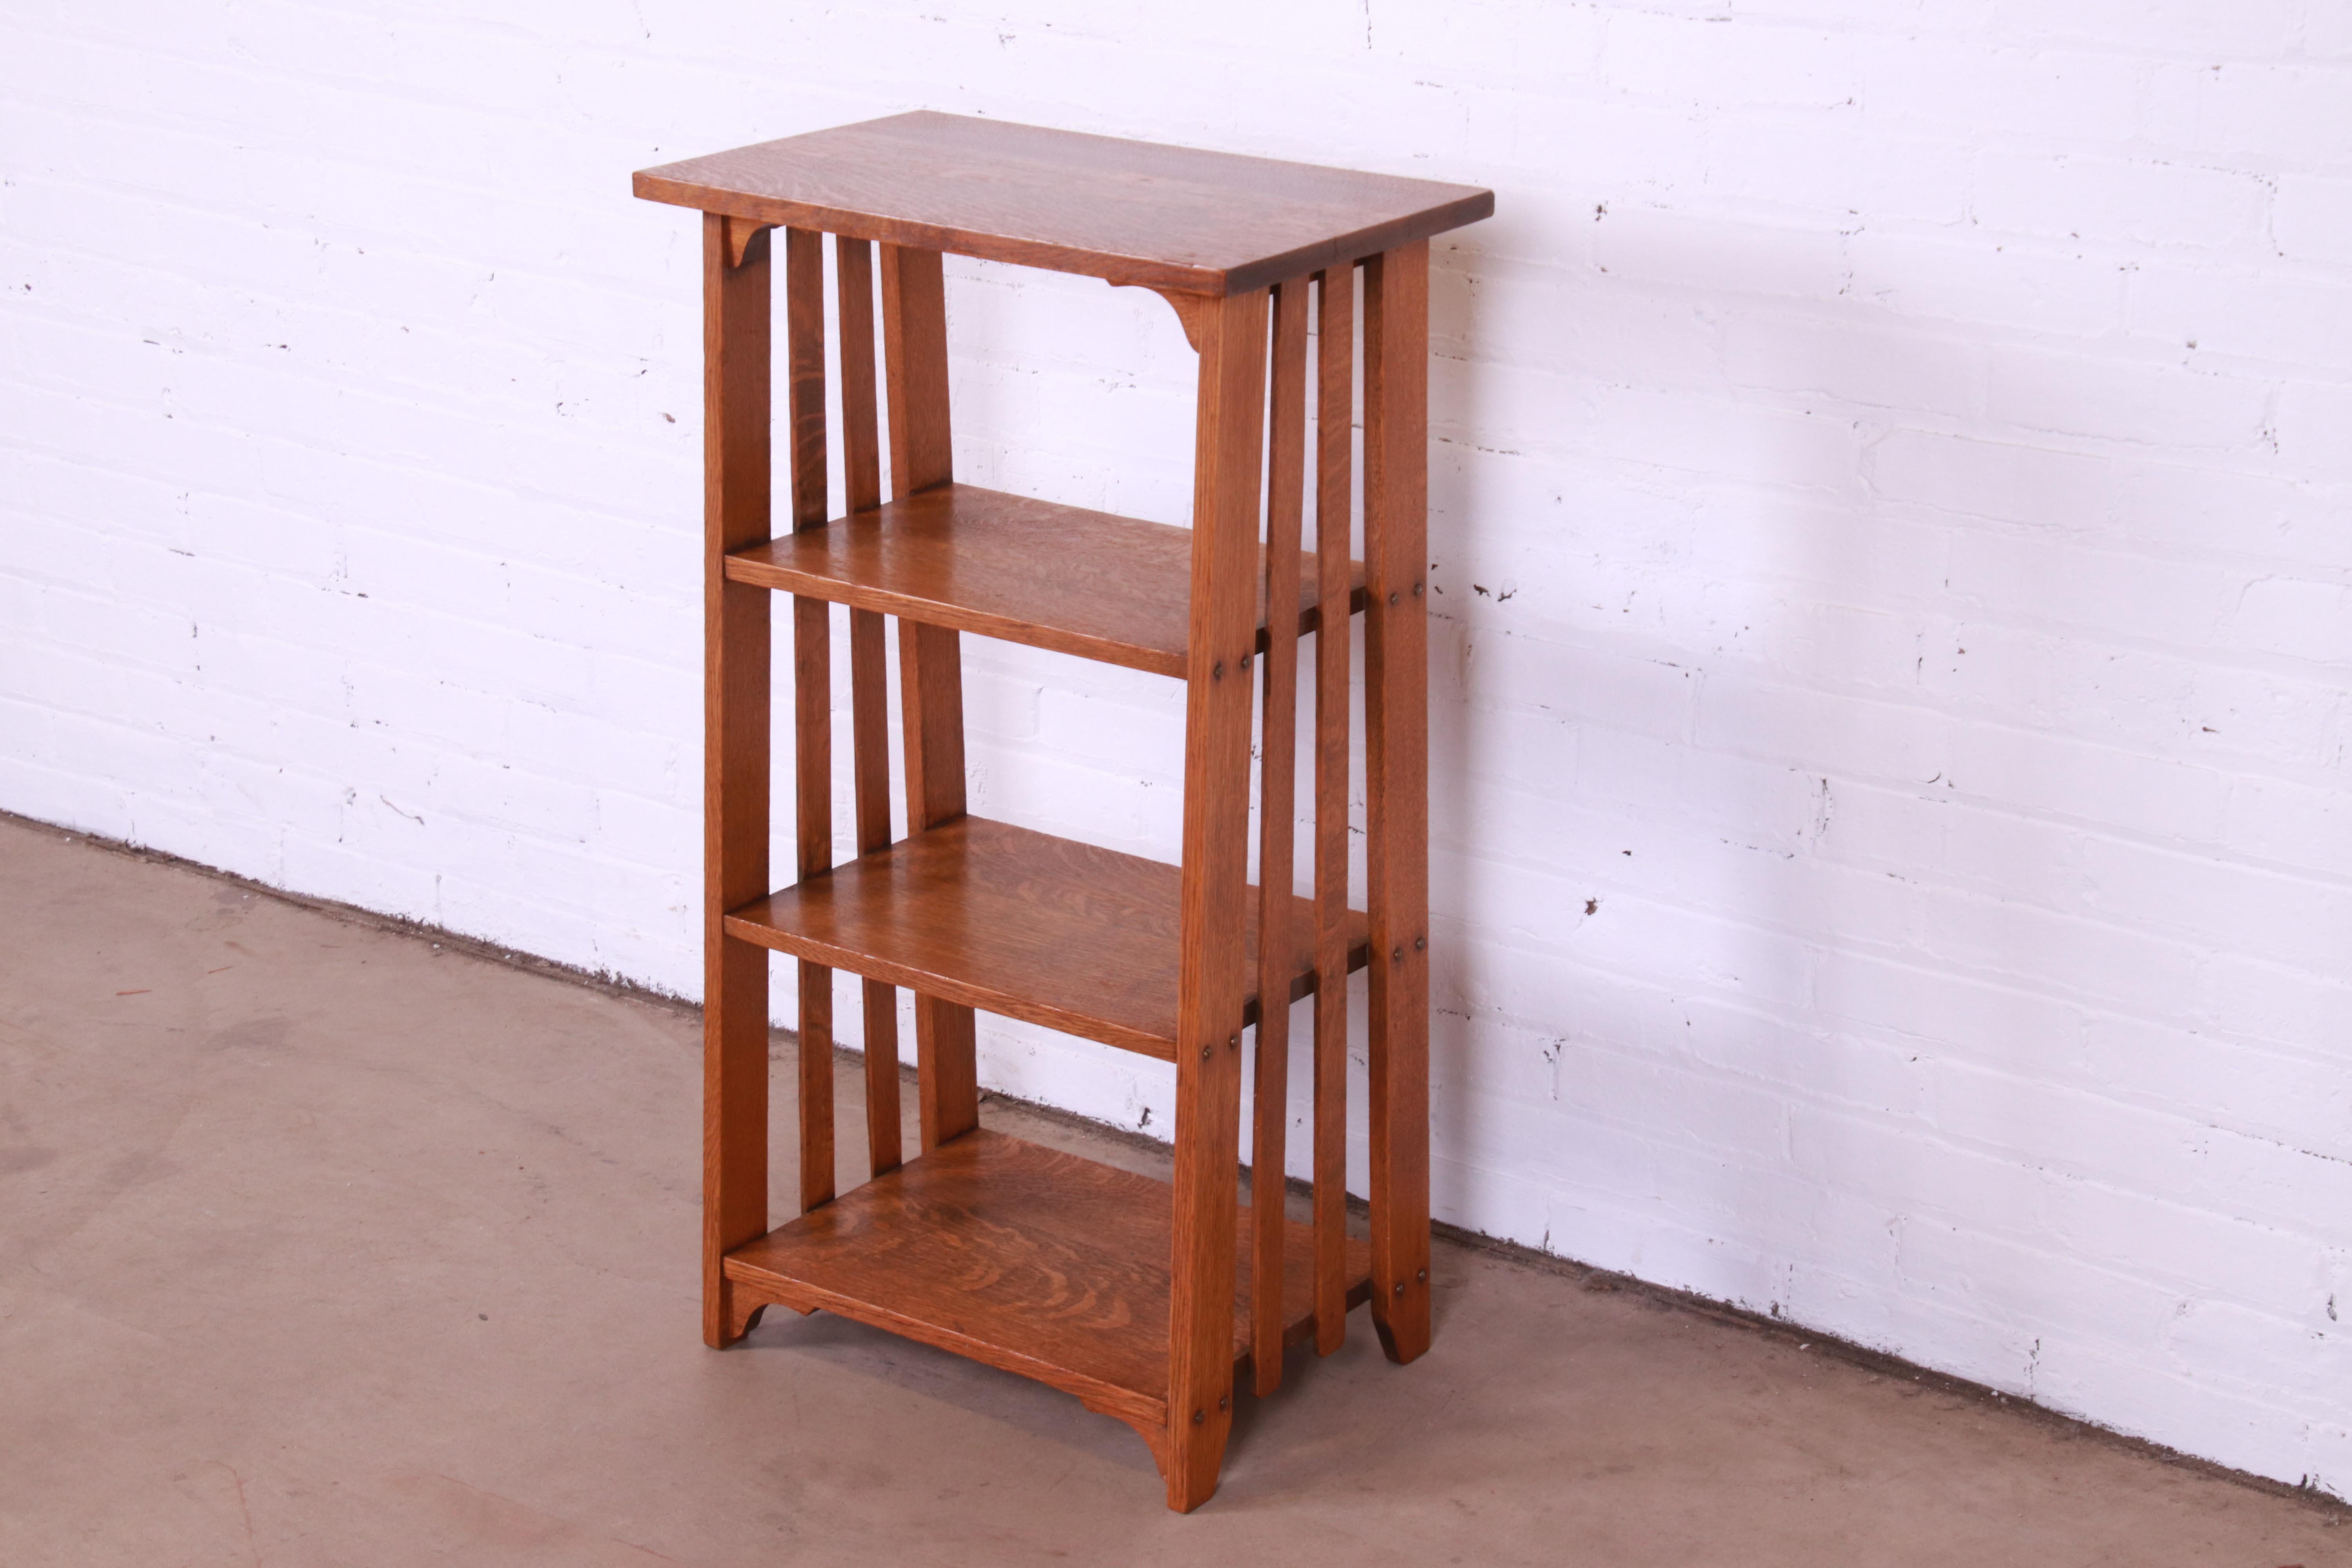 A beautiful antique Arts & Crafts Mission quarter sawn oak bookcase

Recently procured from Frank Lloyd Wright's DeRhodes House

In the manner of Stickley

USA, Circa 1900

Measures: 21